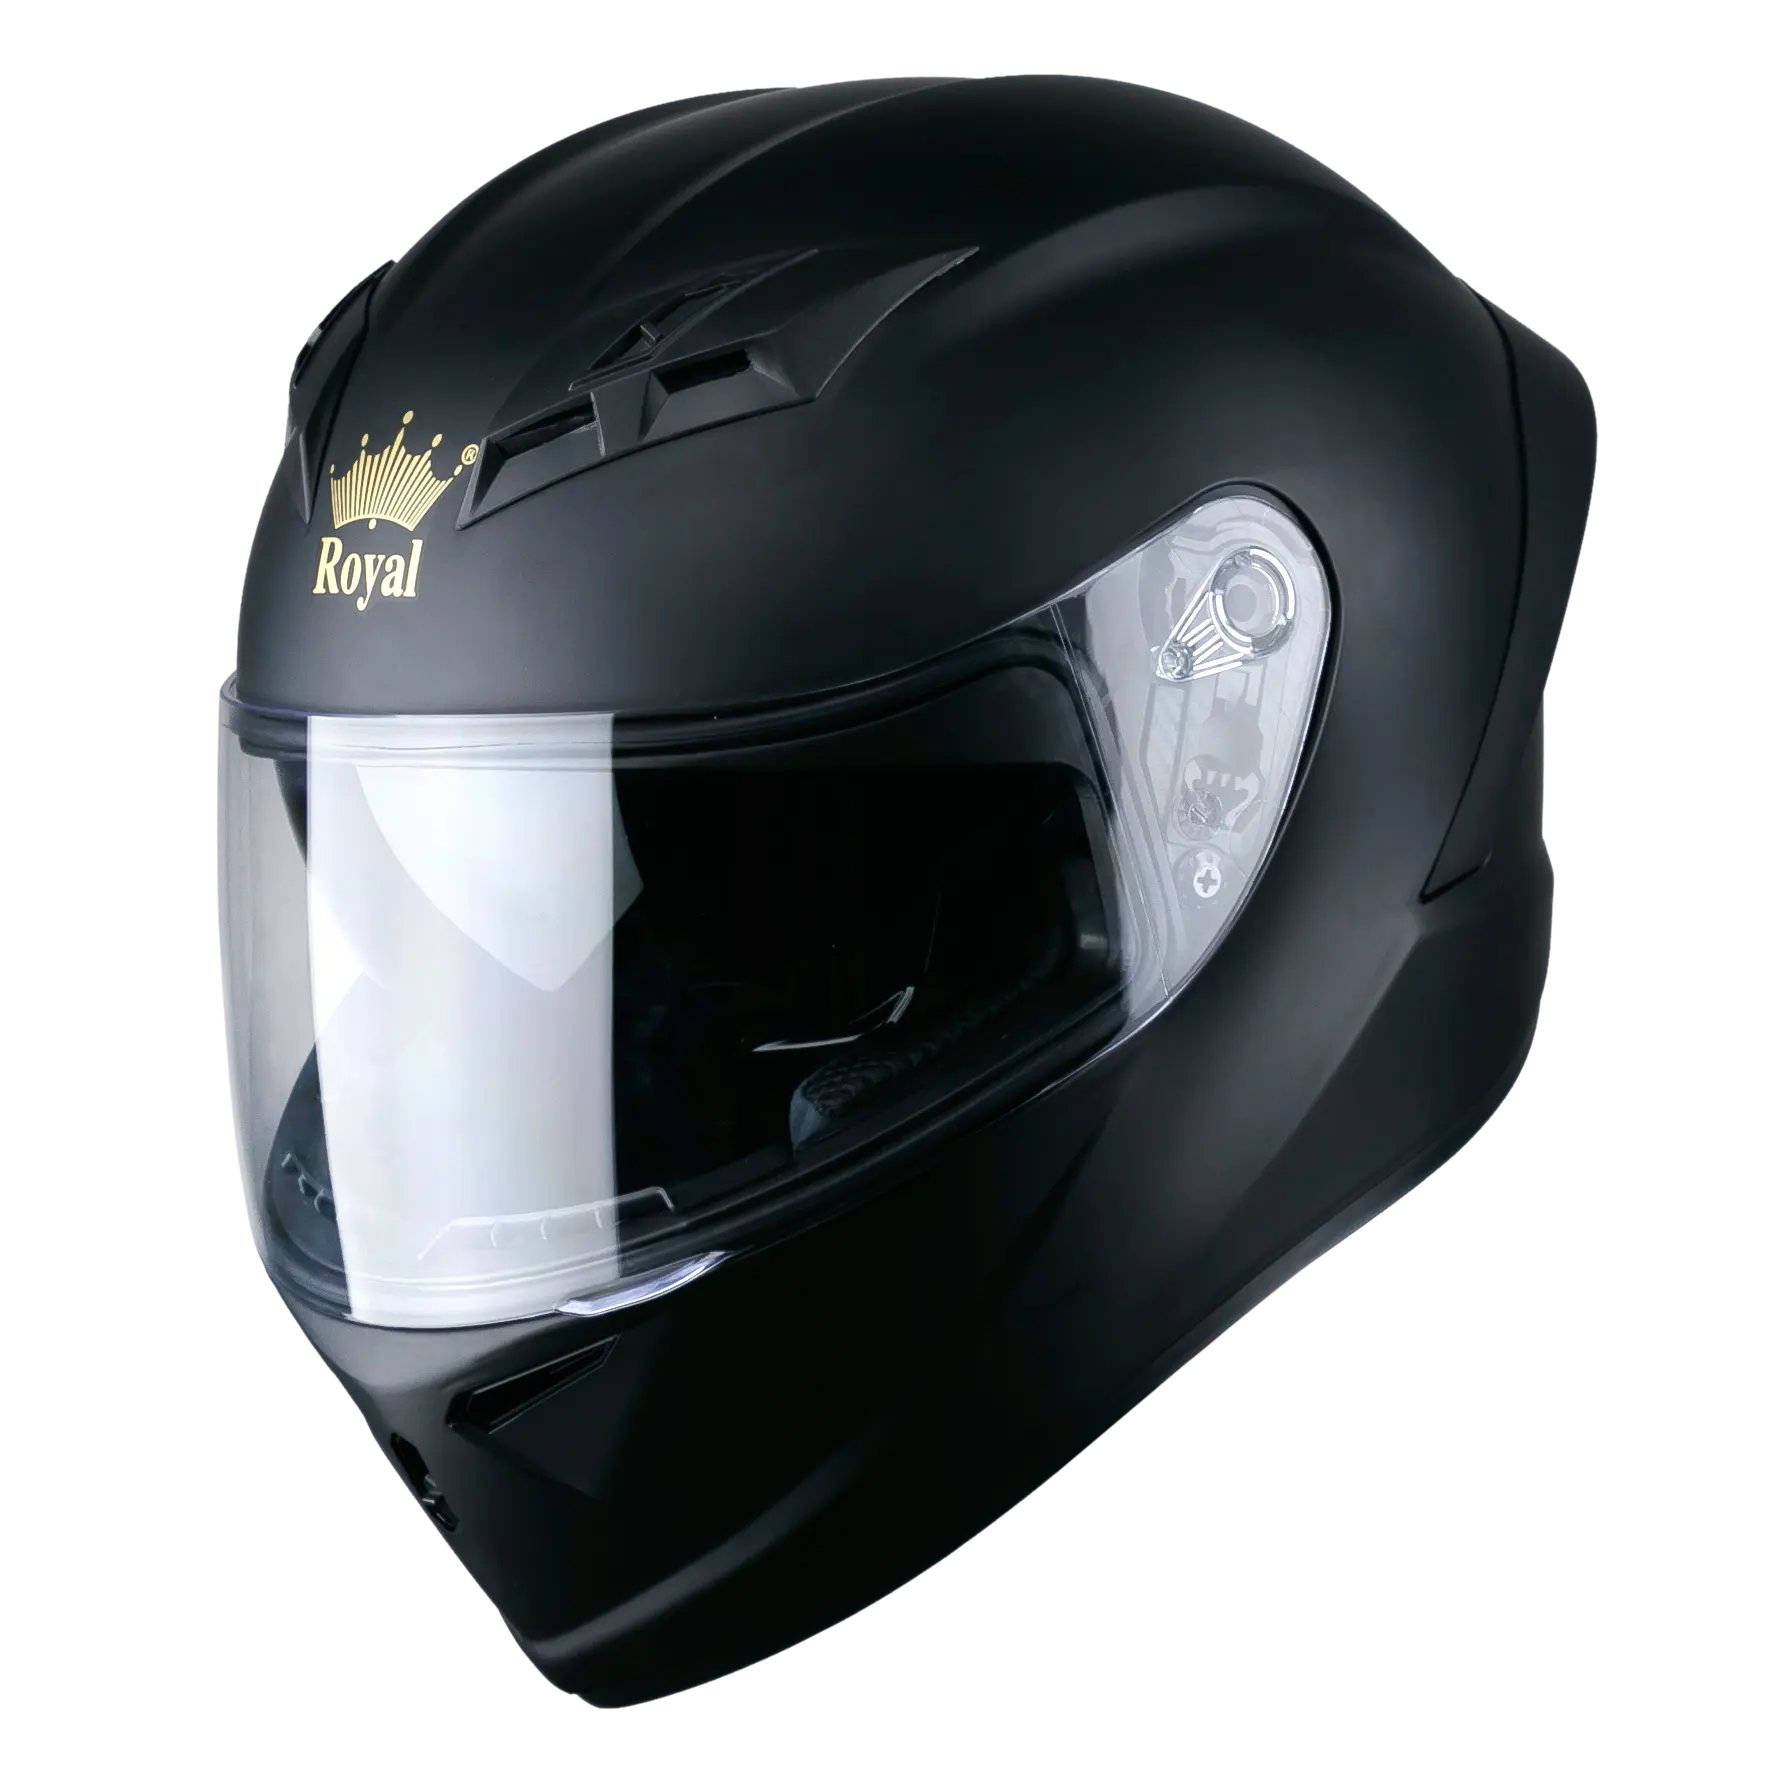 ROYAL M266 Full Face Motorcycle Helmet Unstamp - Safety High-quality Good Price - Advanced ABS With Visor - Factory Sale